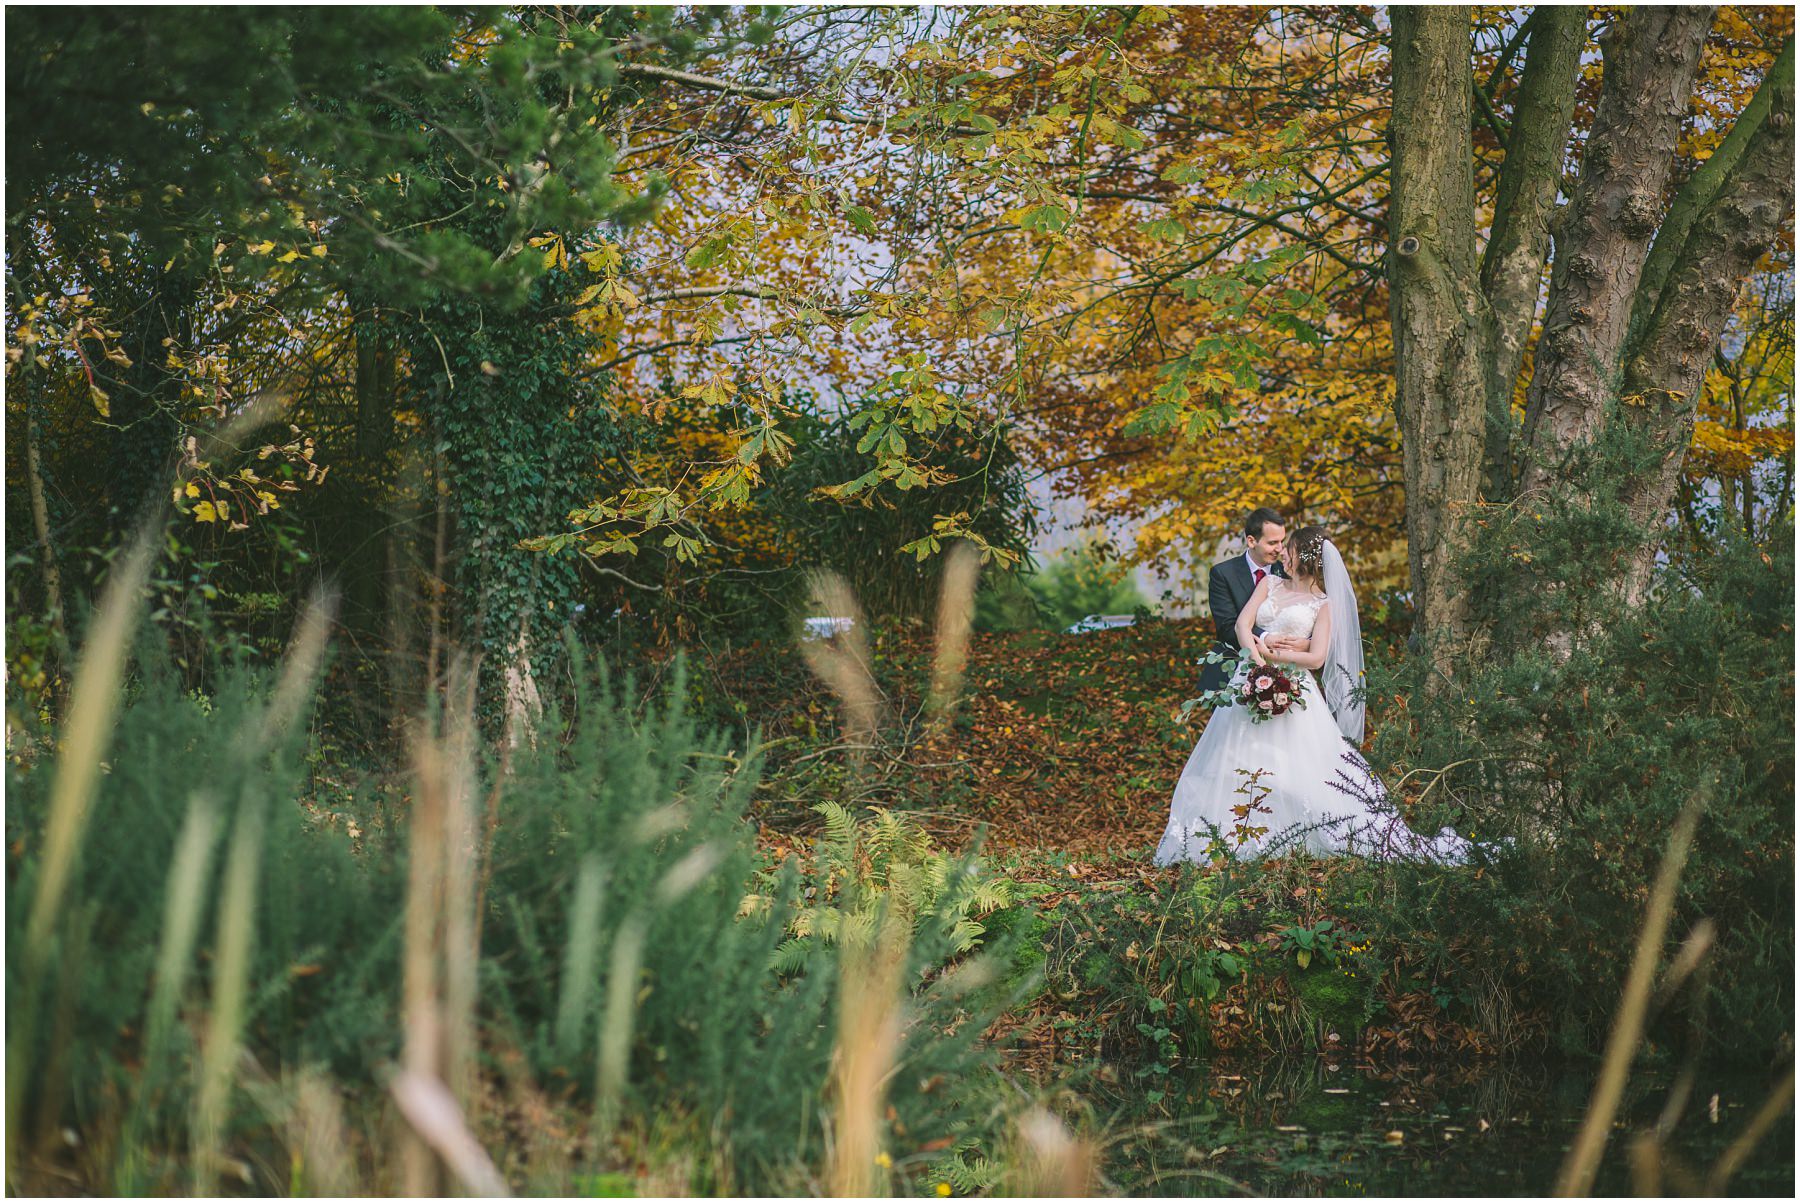 Wedding portraits at The Oak Tree Of Peover